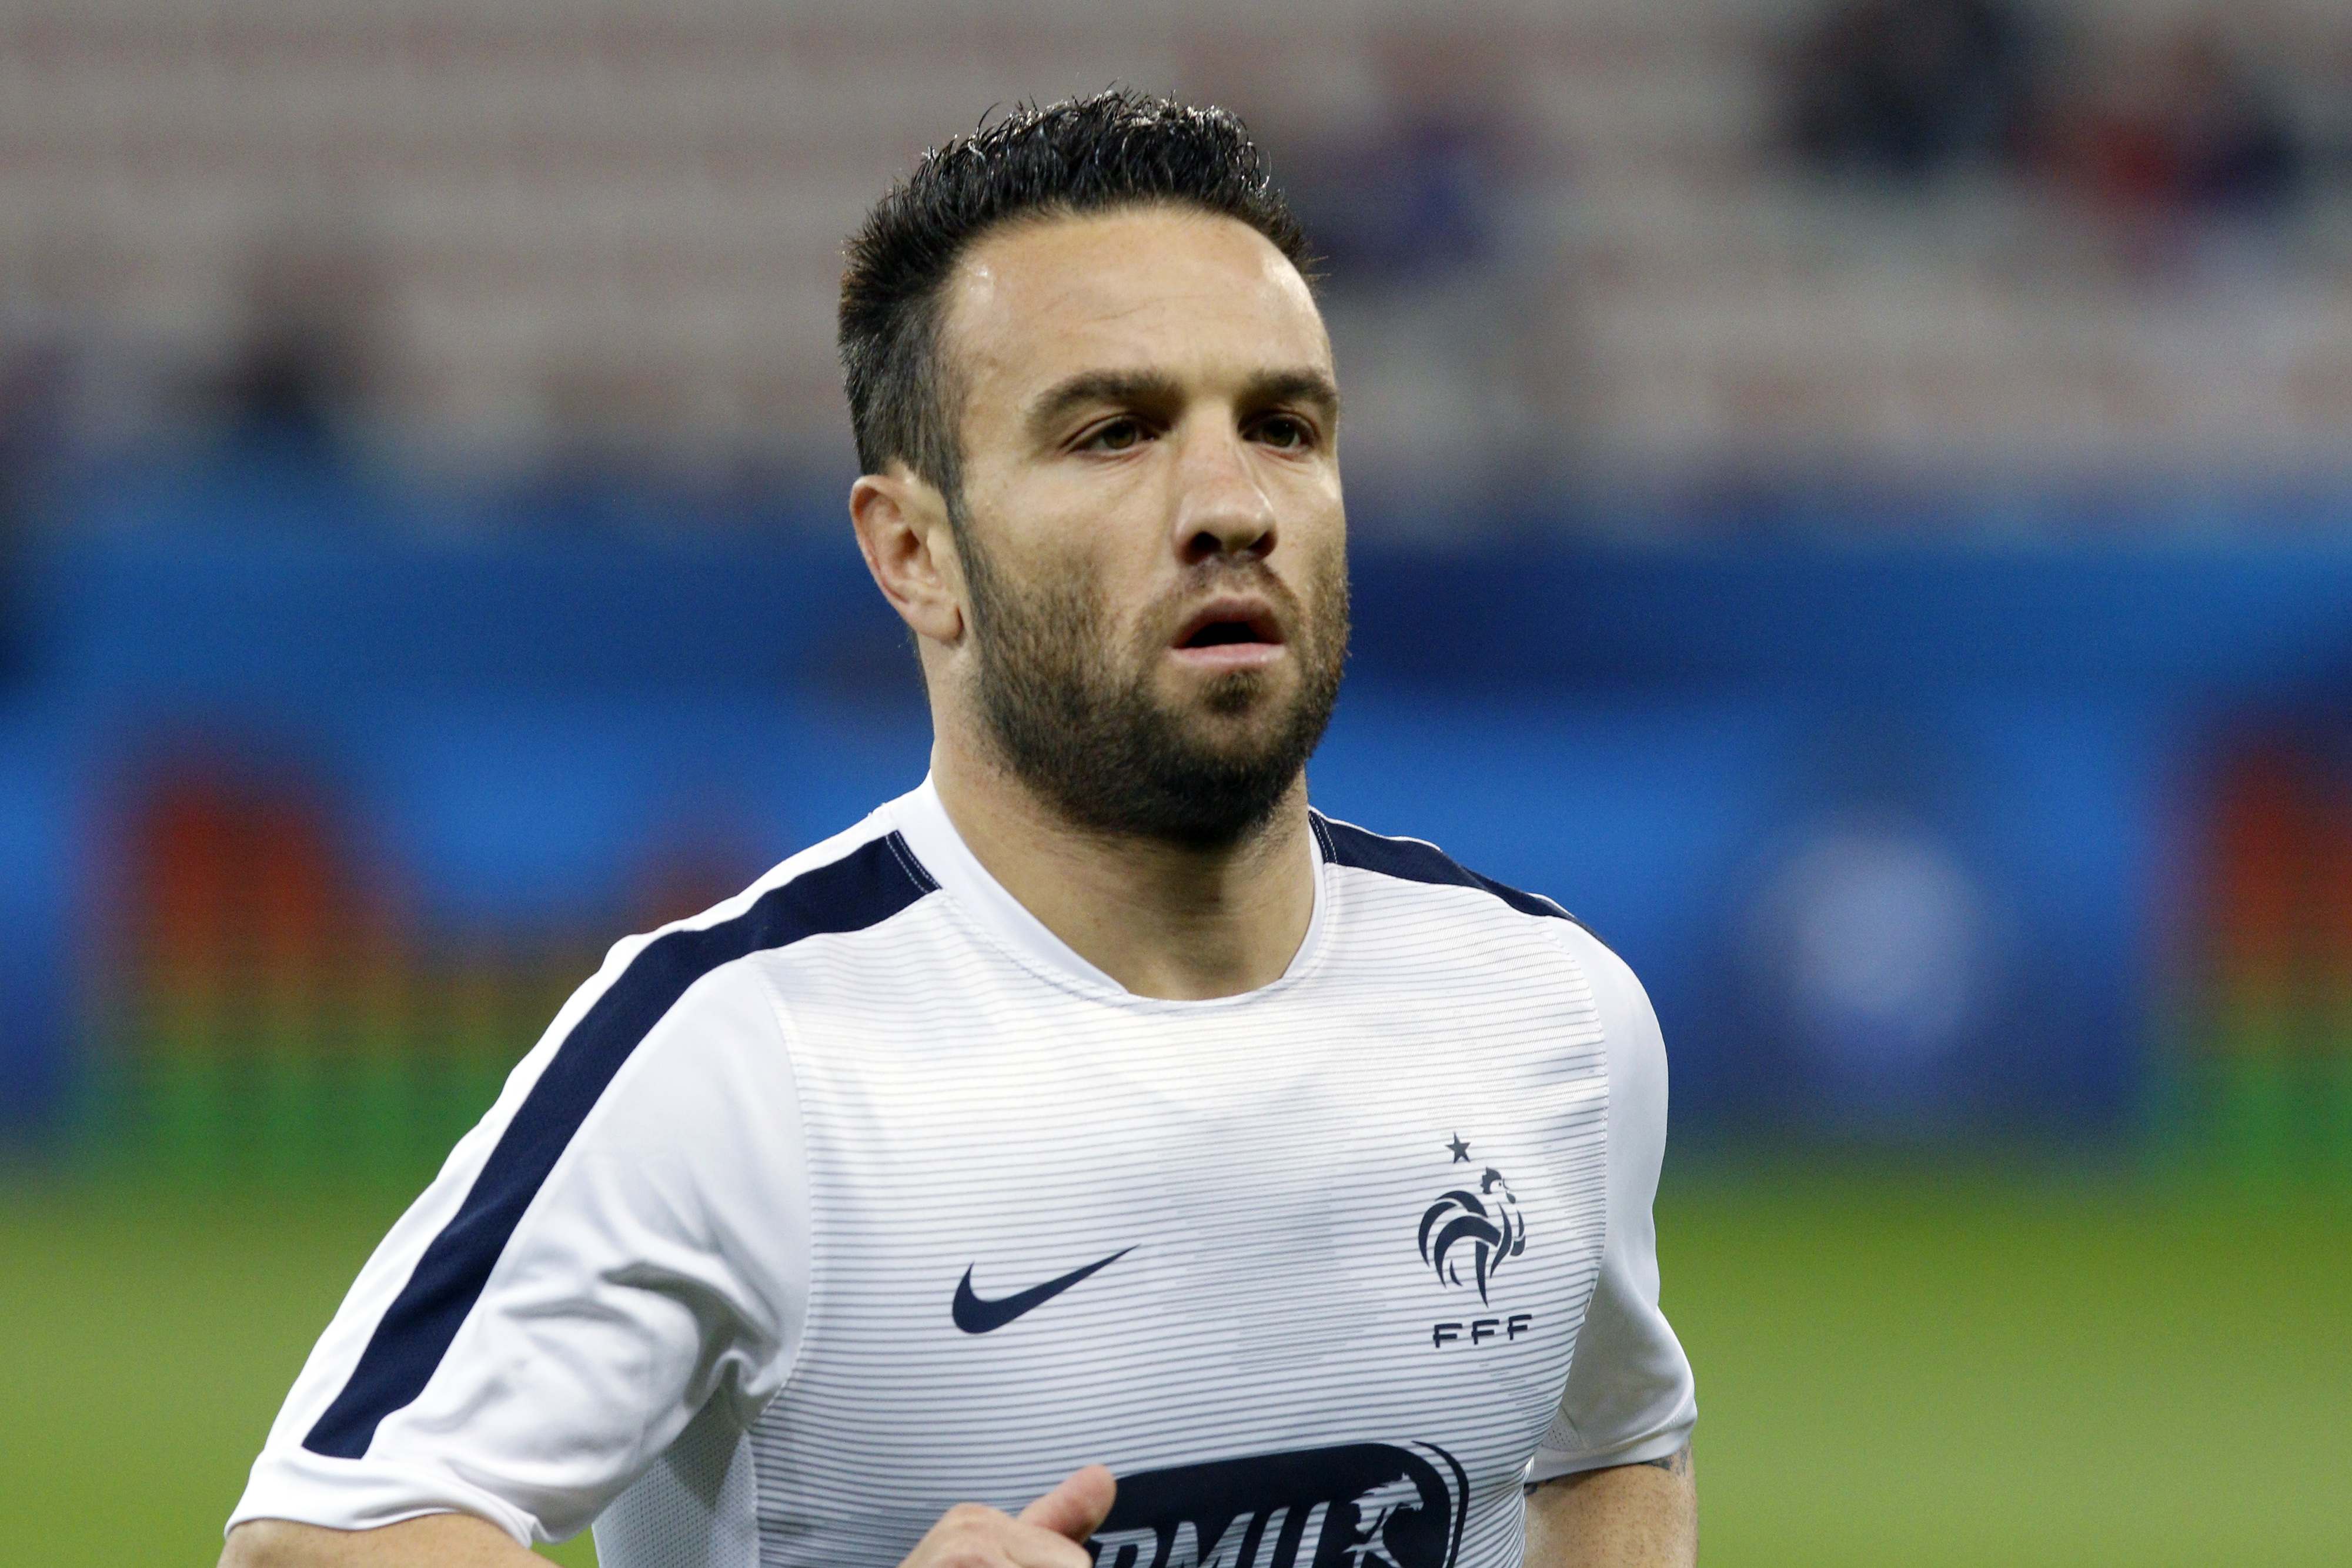 France's national soccer player Mathieu Valbuena is seen before their friendly soccer match against Armenia at Allianz Riviera stadium in Nice, France, in this October 8, 2015. file photo. French police have arrested four people in an inquiry into a suspected attempt to bribe France soccer international Mathieu Valbuena with the help of sex video footage, a police official said on Tuesday October 13, 2015. Among the four being held in custody after arrests in Paris and Marseille is Djibril Cisse, the former French international striker, the official said.  Picture taken October 8, 2015.  REUTERS/Philippe Laurenson/Files